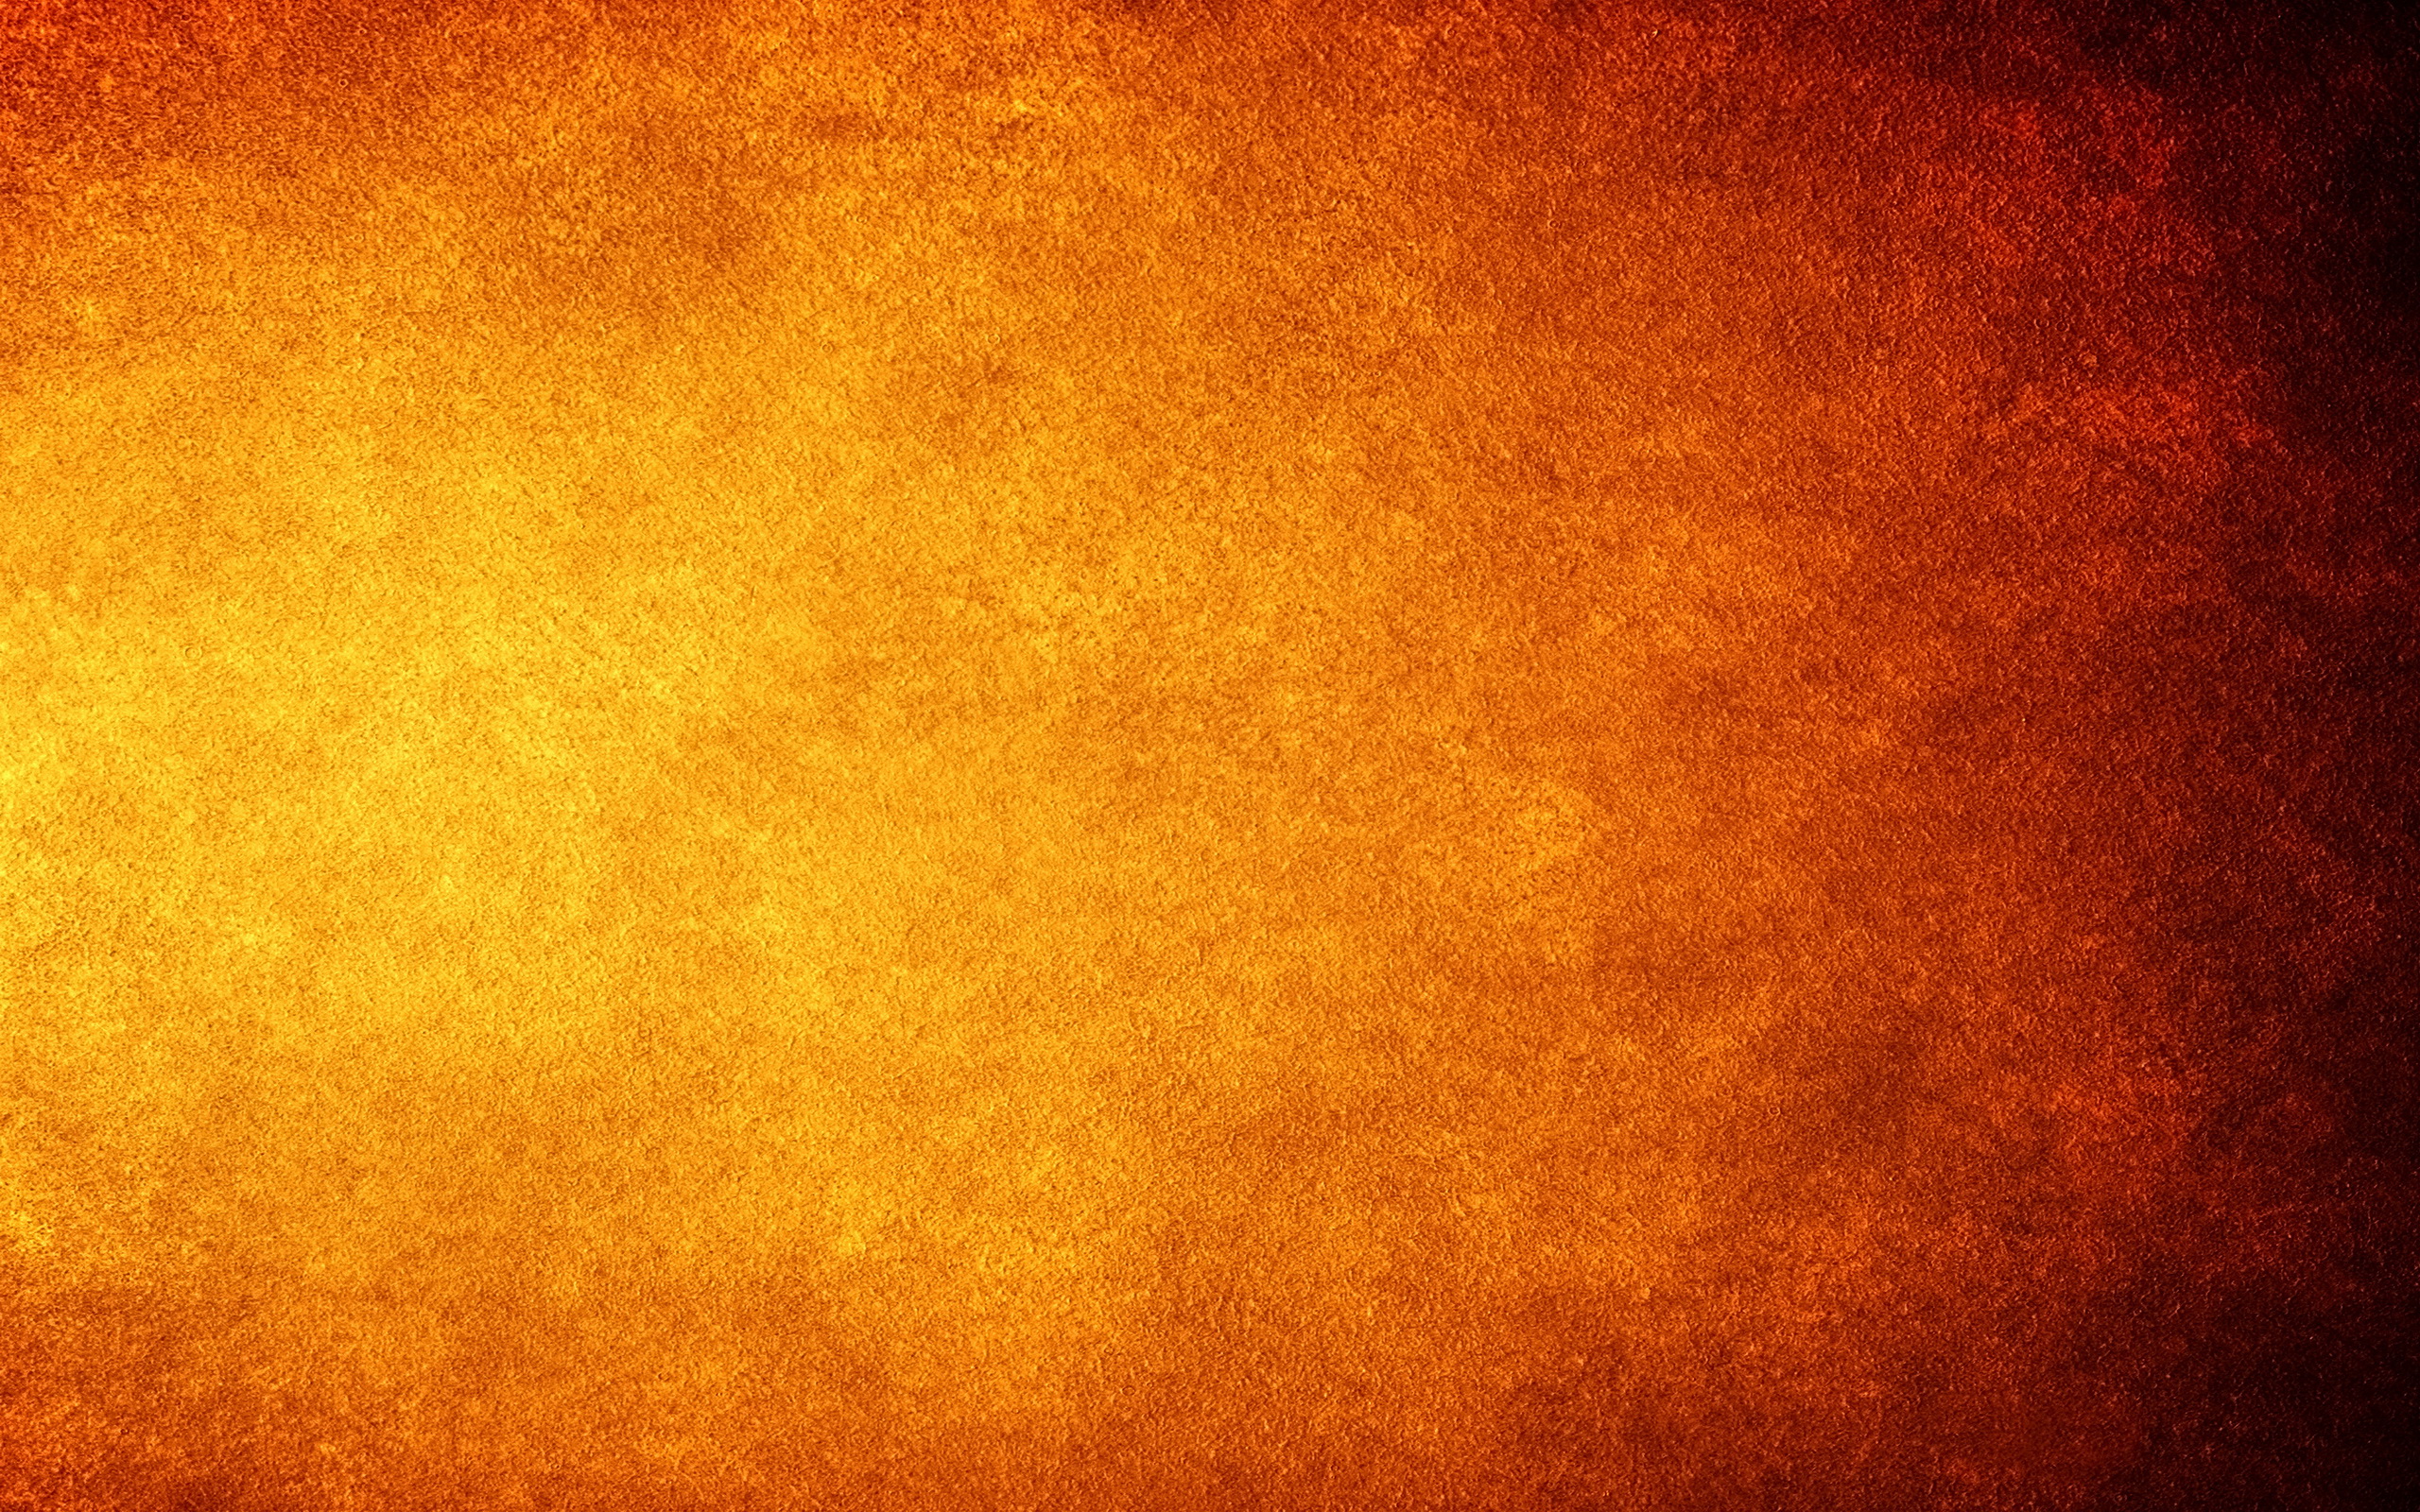 Red and orange wallpaper